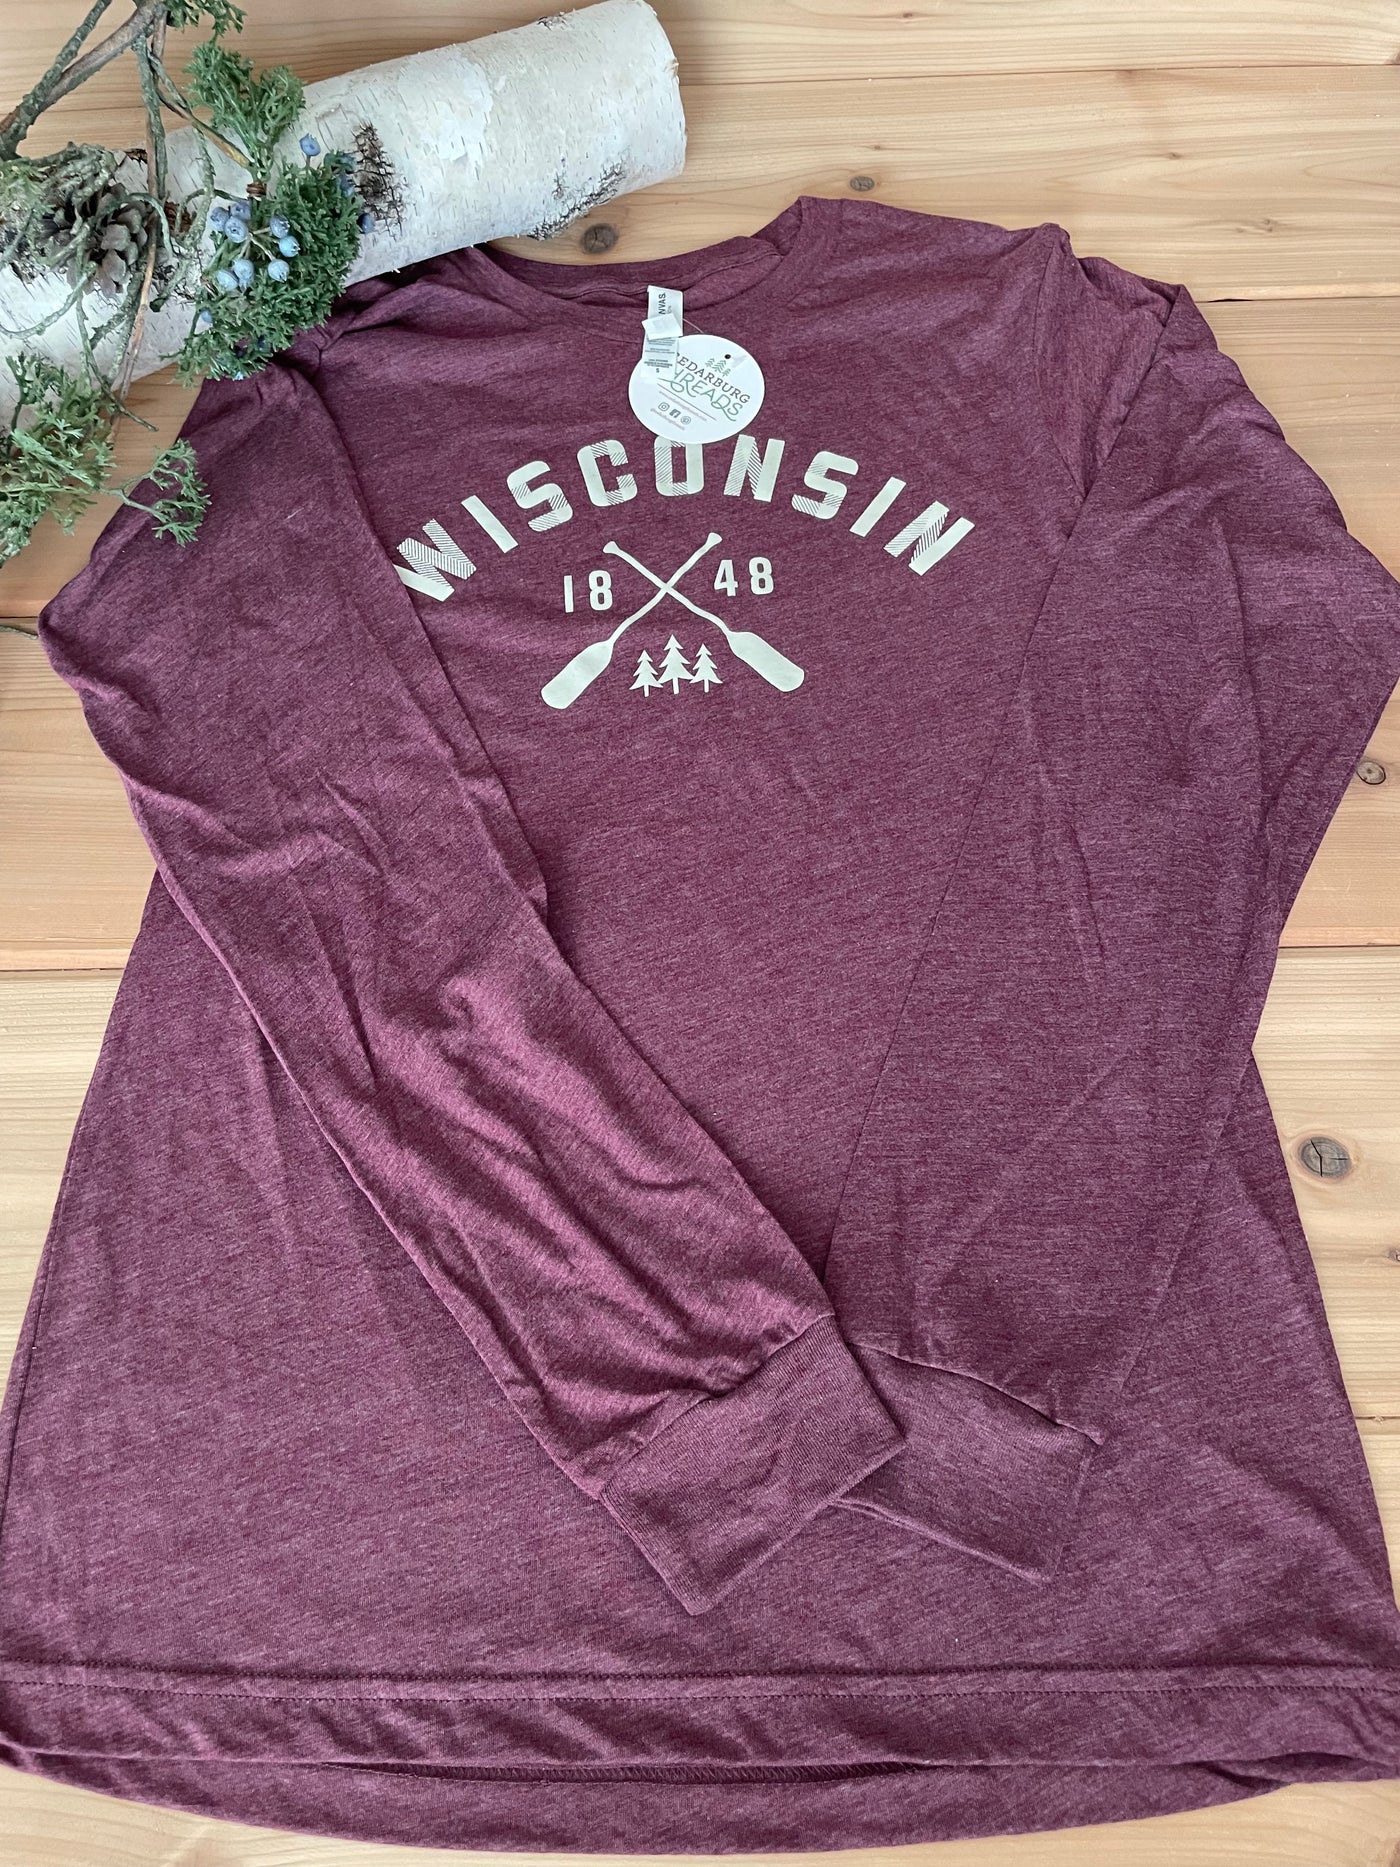 Wisconsin Paddle Long Sleeve Unisex Tee-Local Delivery